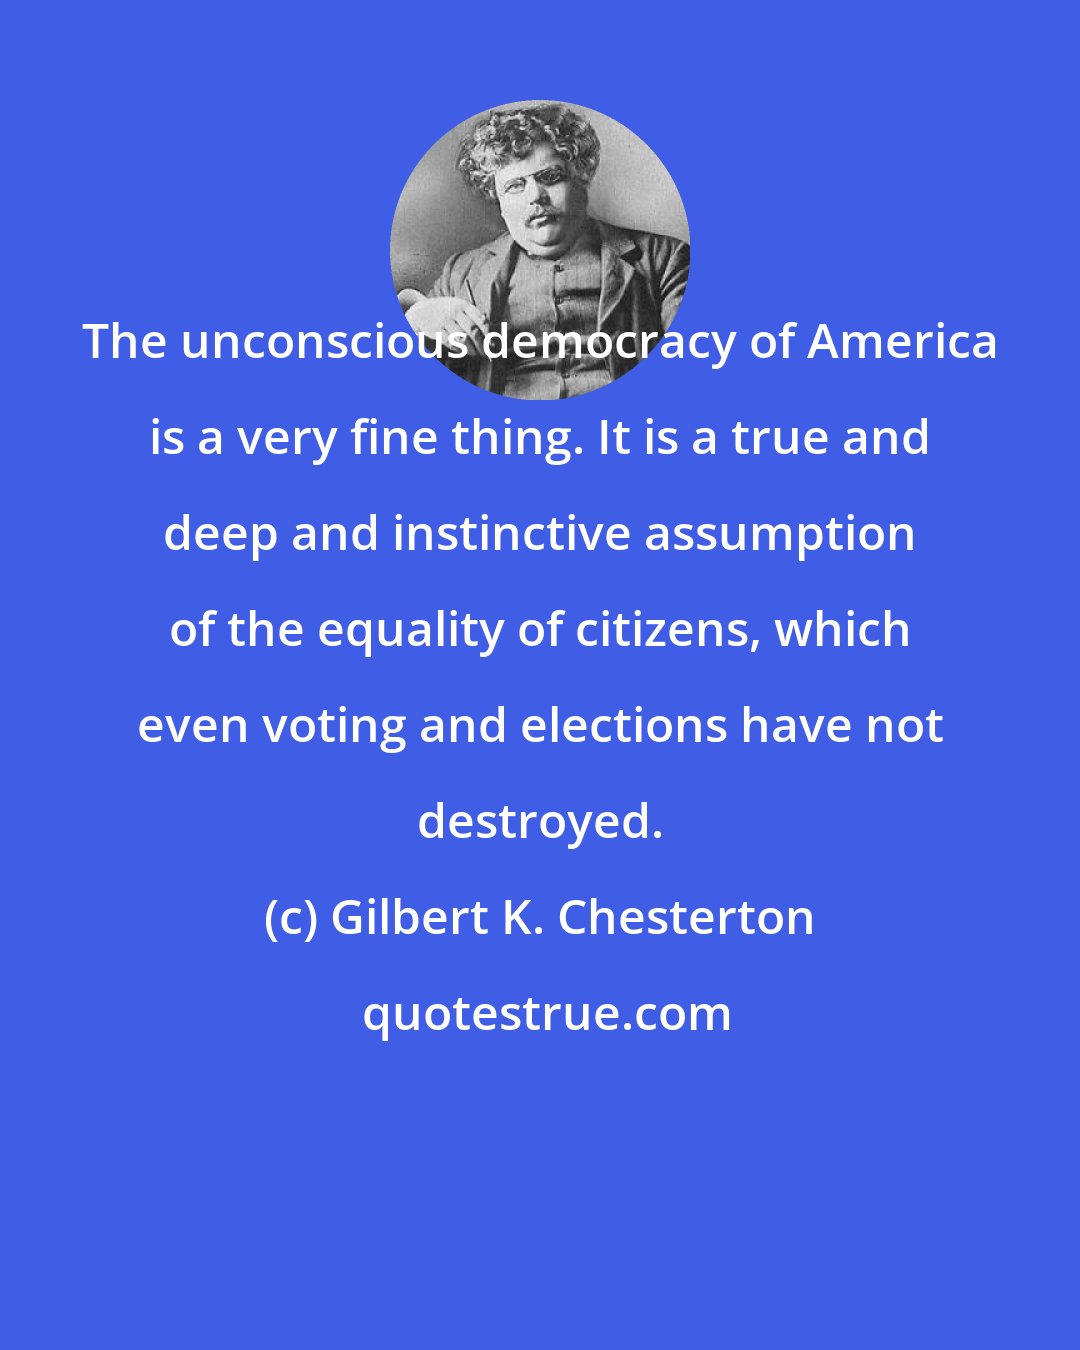 Gilbert K. Chesterton: The unconscious democracy of America is a very fine thing. It is a true and deep and instinctive assumption of the equality of citizens, which even voting and elections have not destroyed.